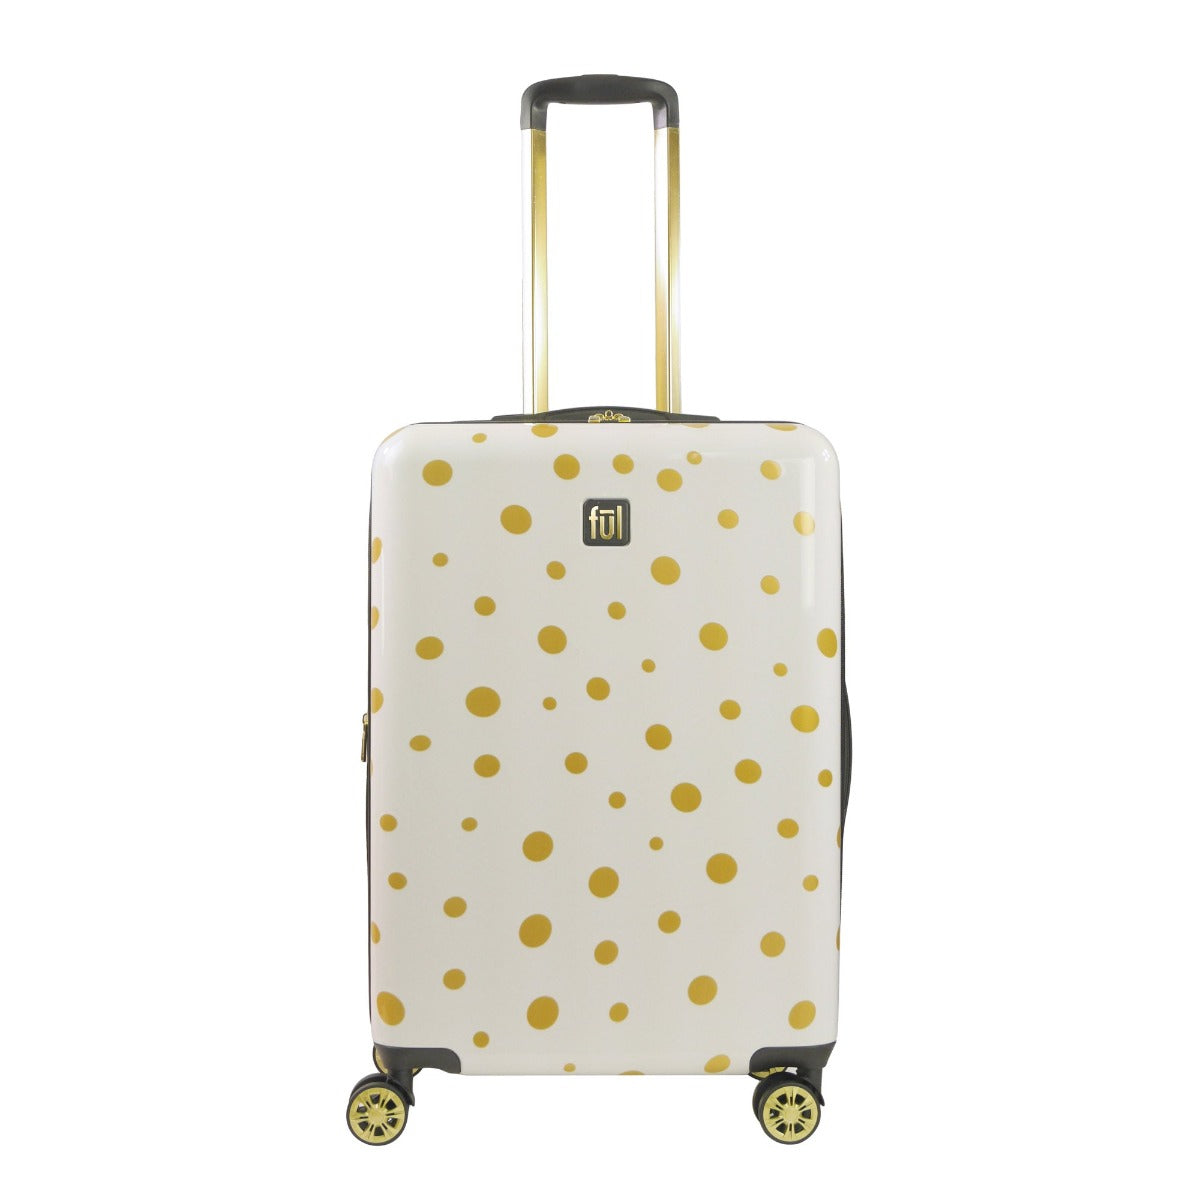 Ful Impulse Mixed Dots hardside spinner 26" checked luggage white gold suitcase